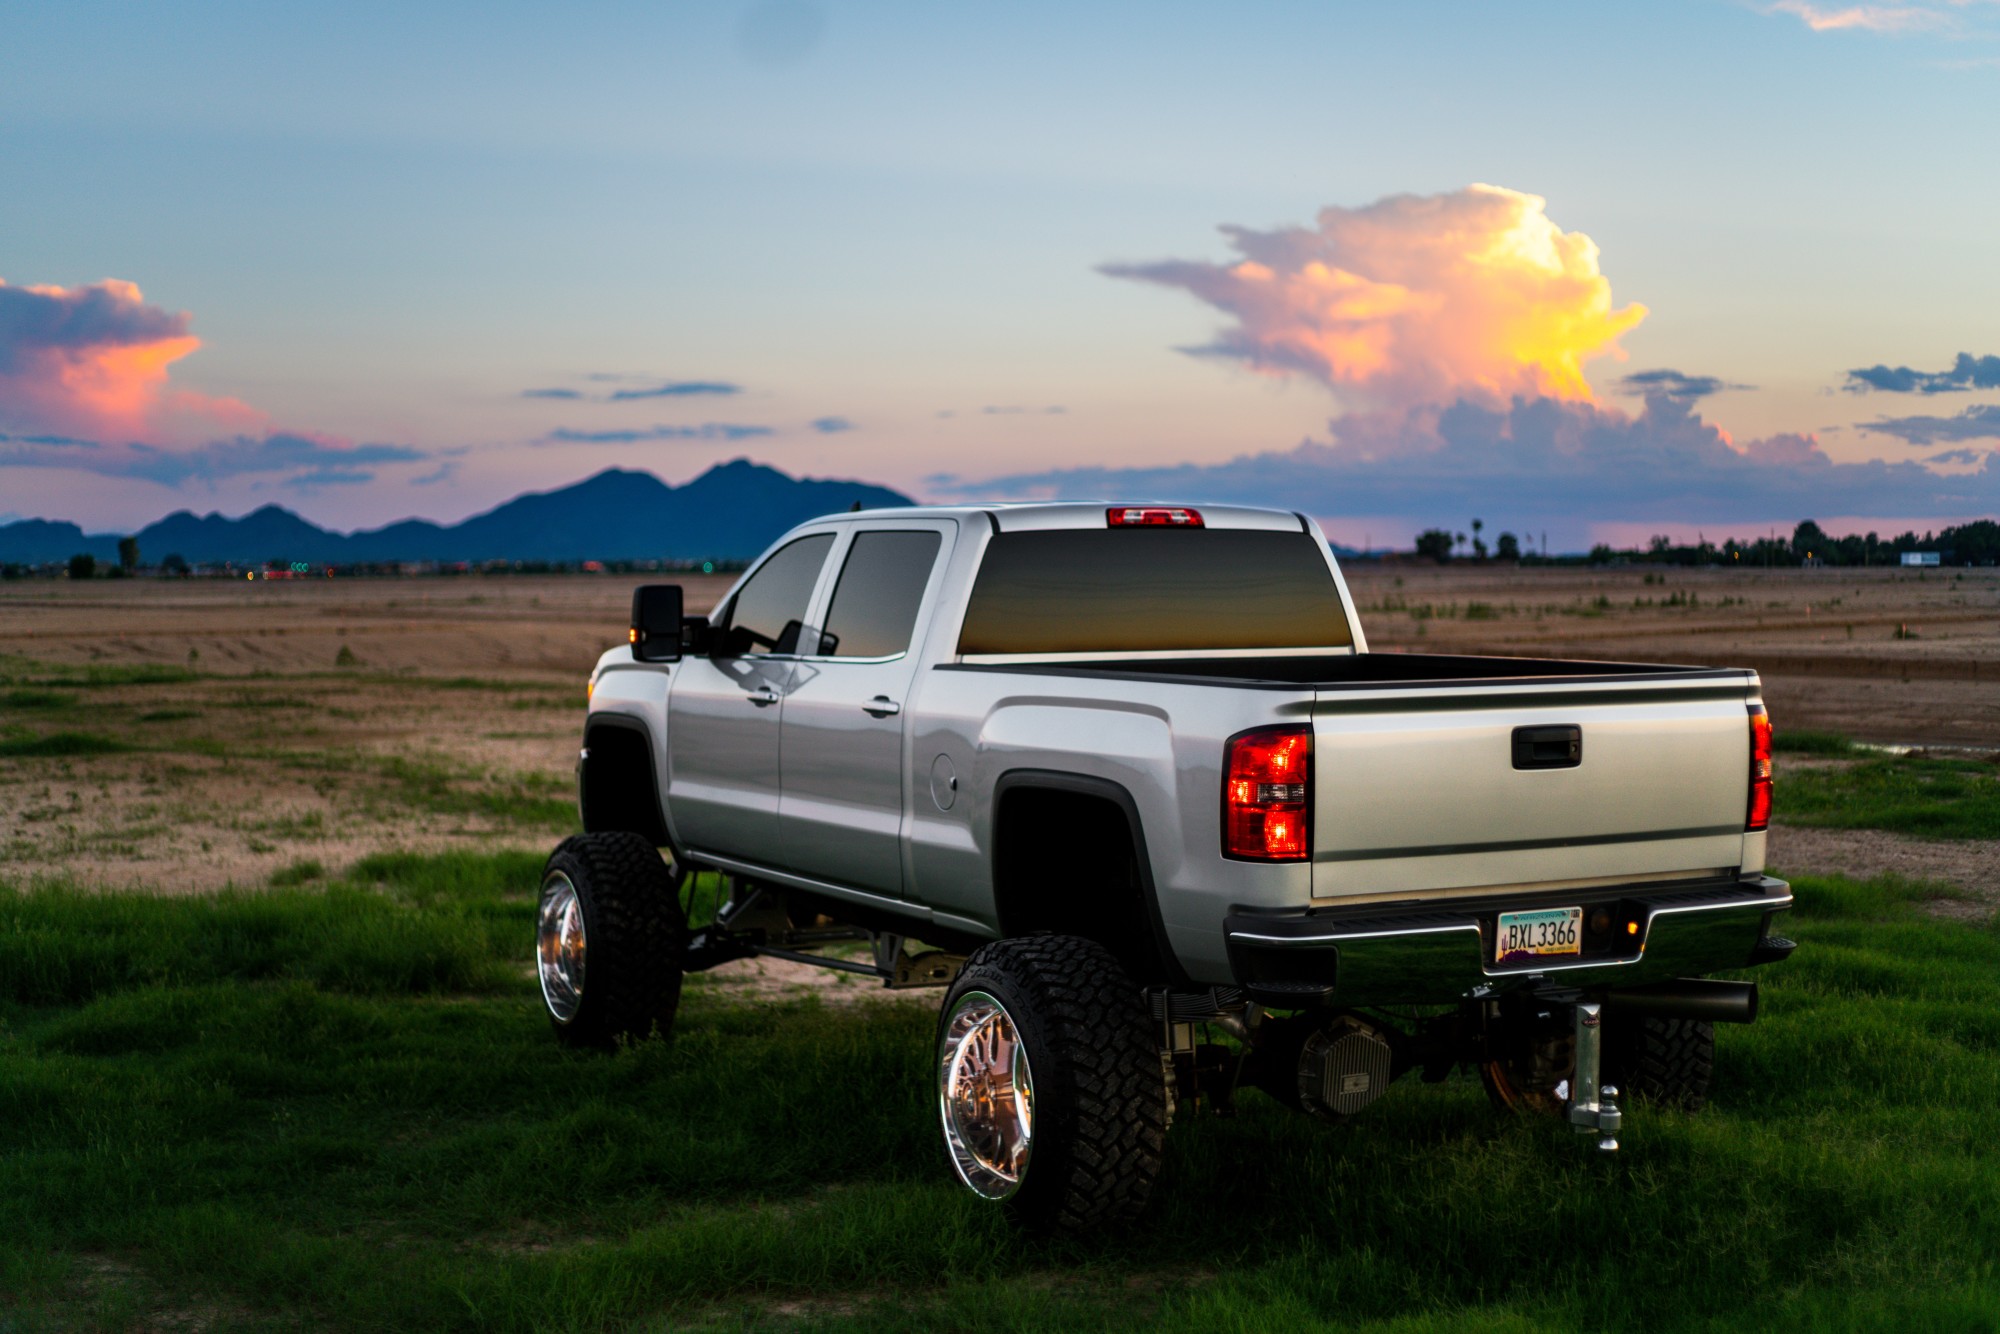 Upgrade Your Ride with OUTLAW Off-Road’s Truck Parts & Accessories